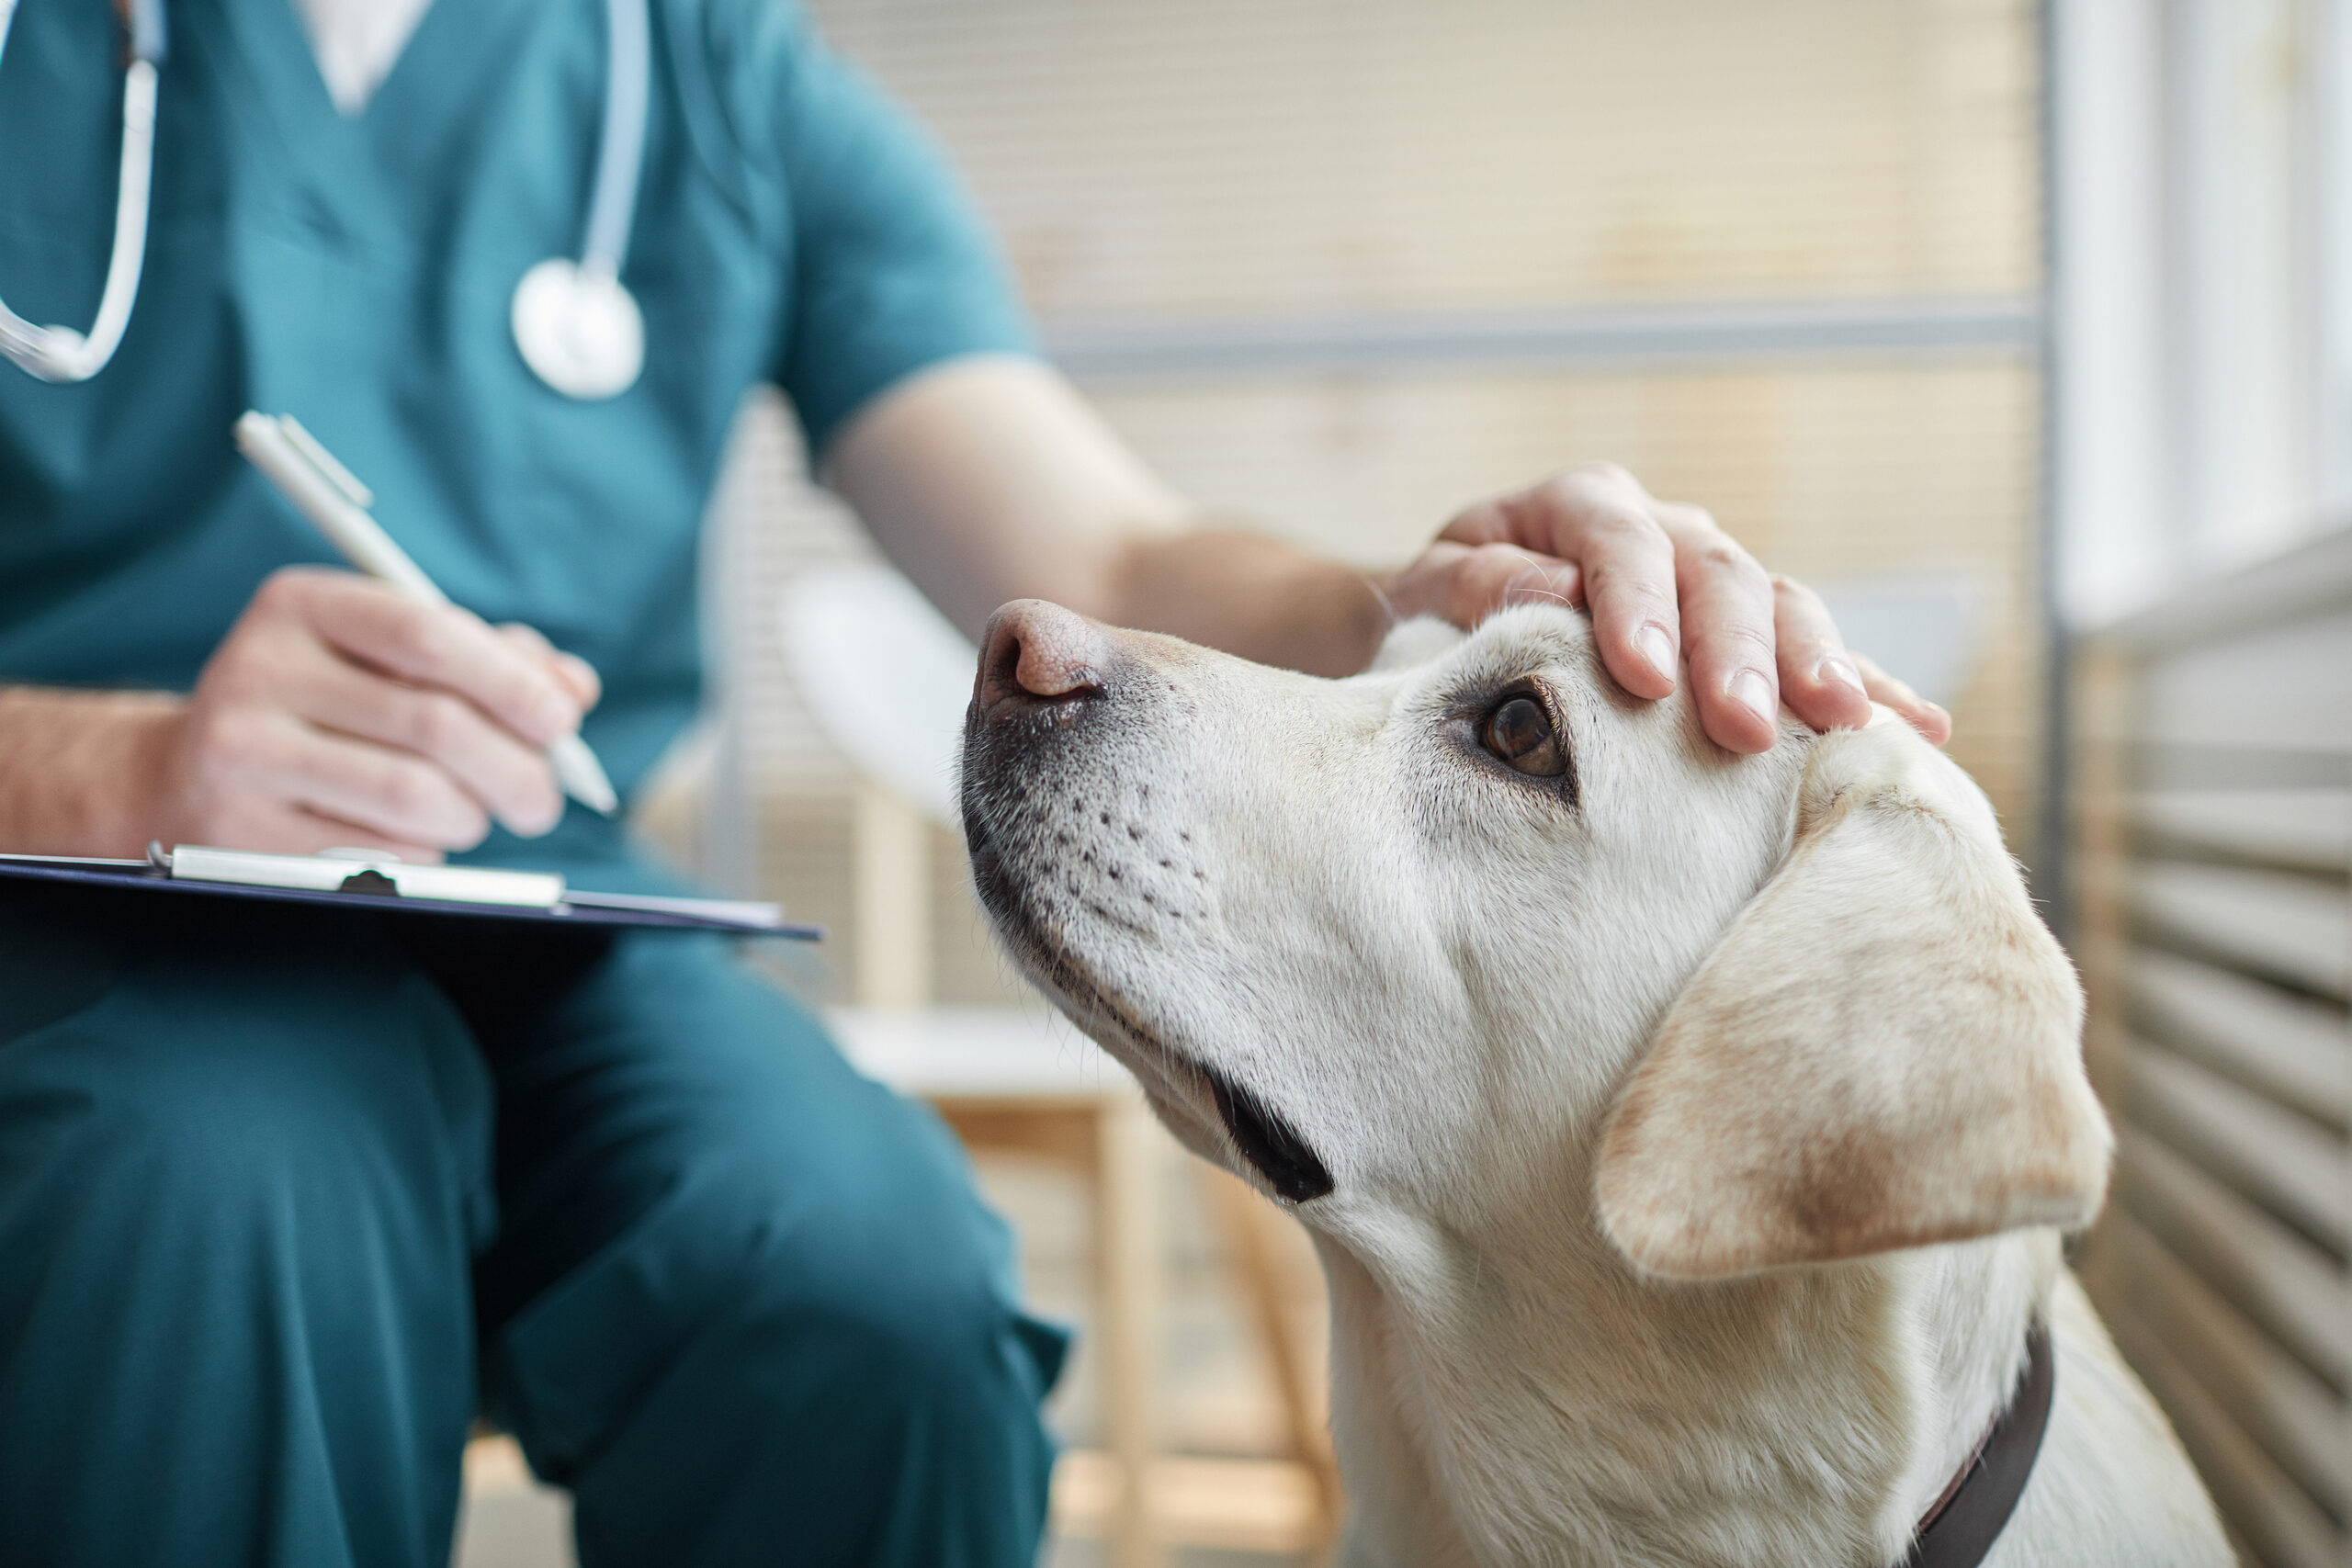 Veterinarian-Turned-Insurance-Pro Sees Practitioners Thriving But Stressed